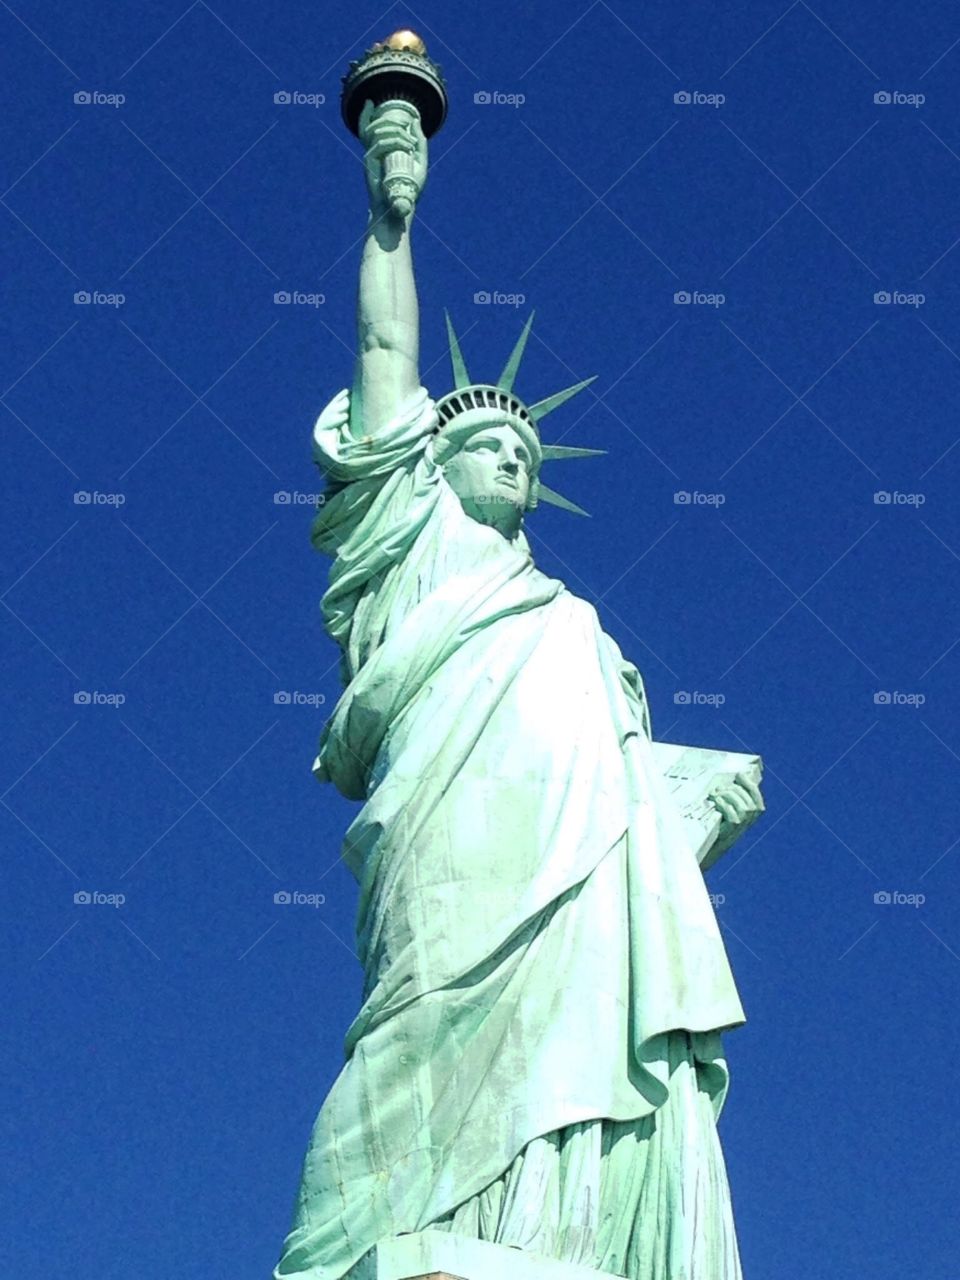 Statue of Liberty. Statue of Liberty with bright clear blue sky from Liberty Island